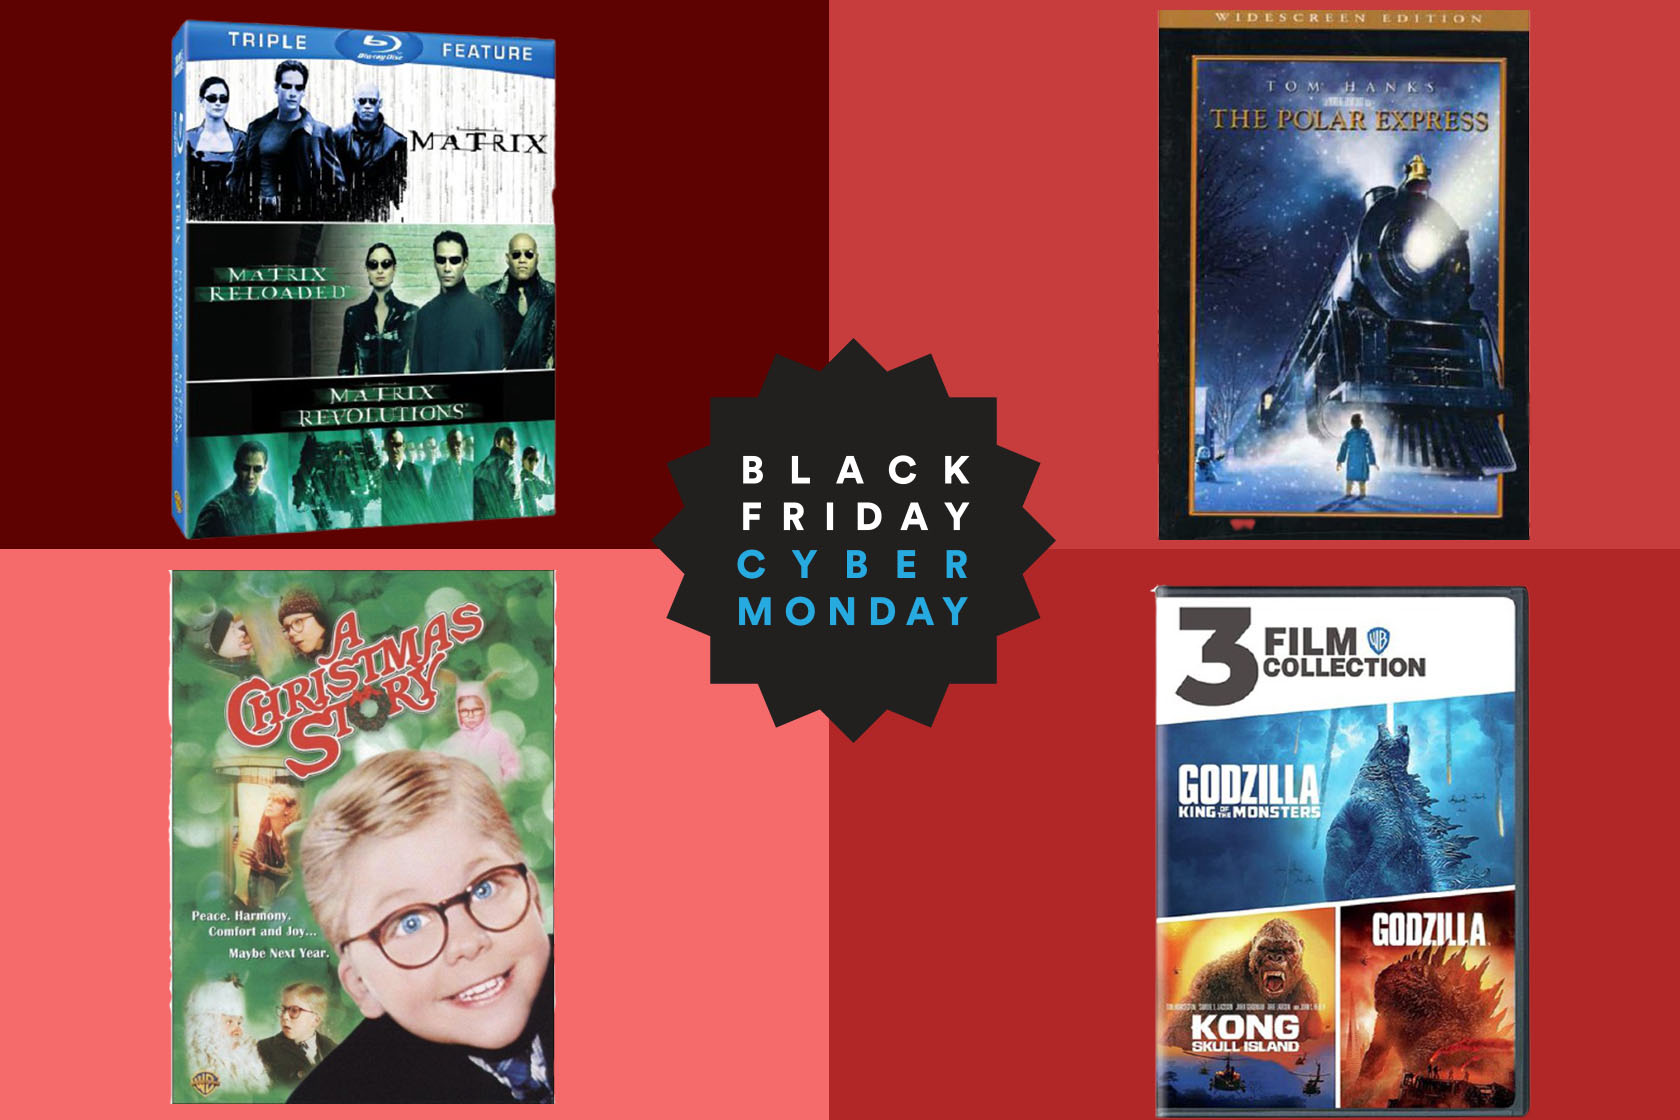 DVDs are on sale at Walmart for Black Friday